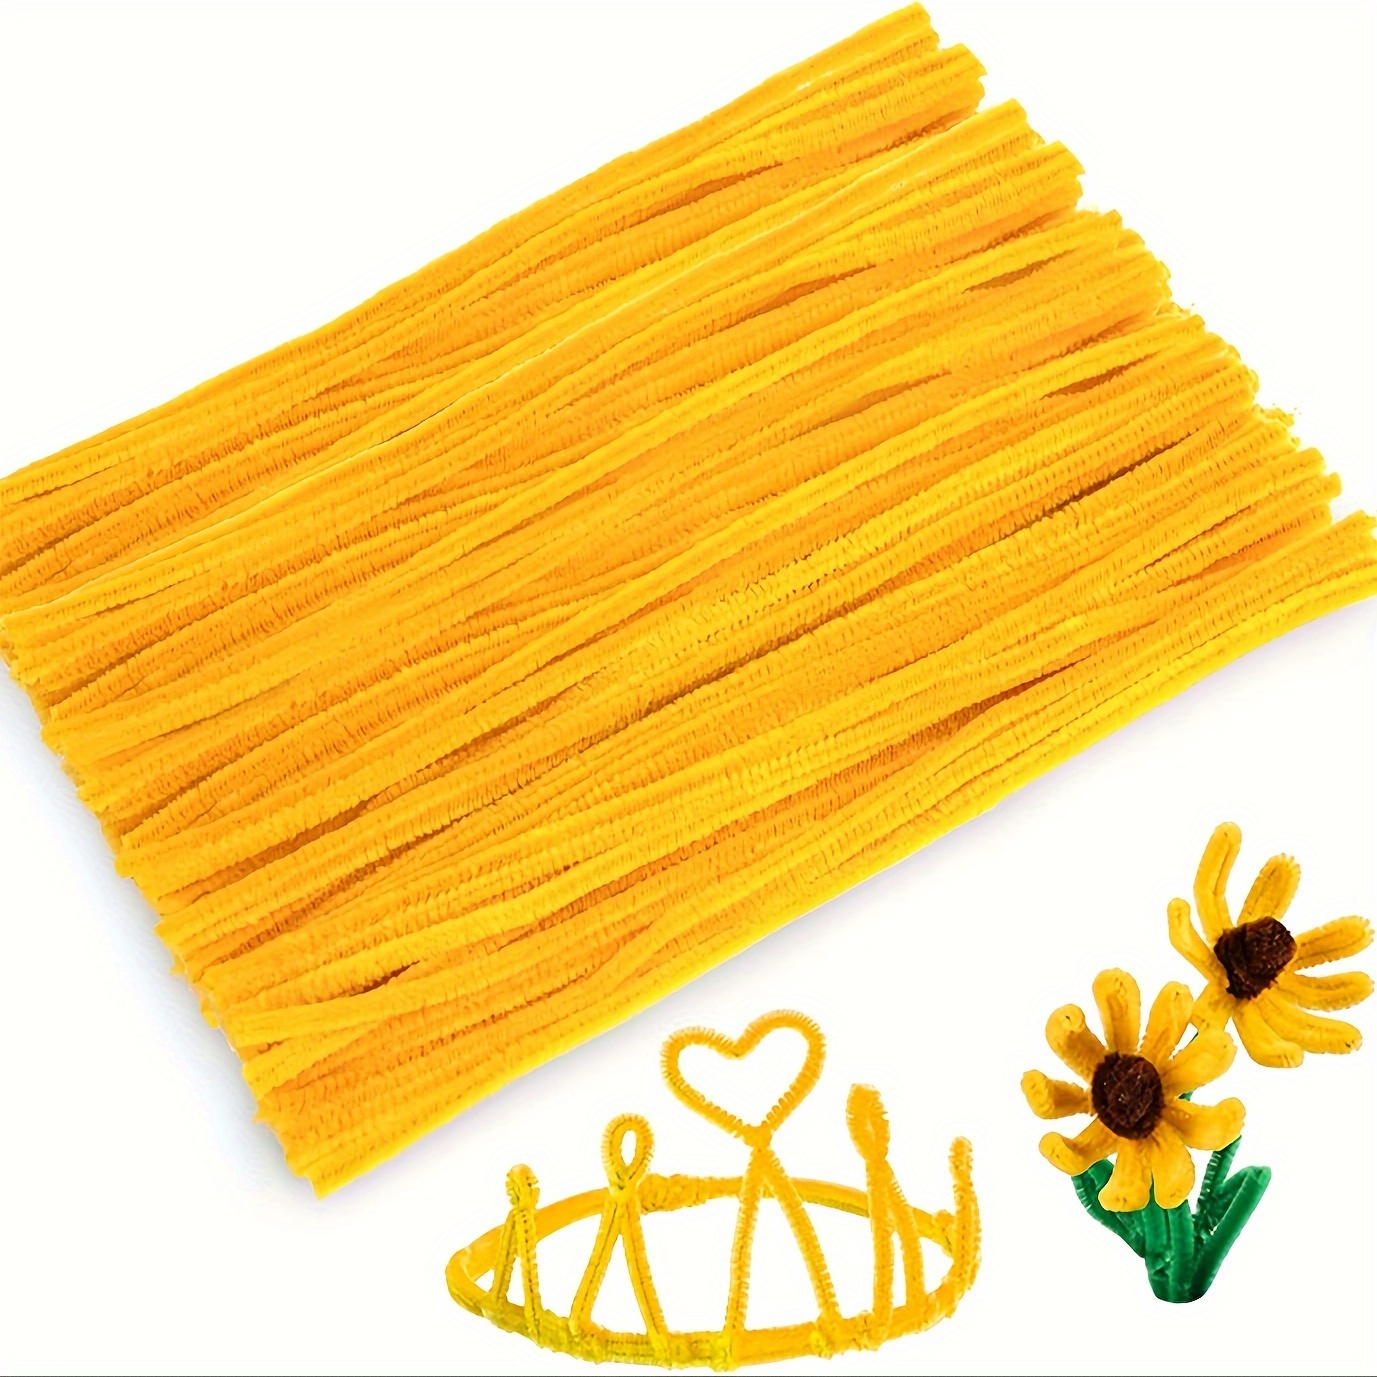 

200pcs Yellow Pipe Cleaners Set For Crafts, Included 100pcs Pipe Cleaner, 50 Eyes, 50 Pompoms, Upgrade Furry Chenille Stems Stick, Diy Arts Crafts Project, Creative Home Decoration Supplies